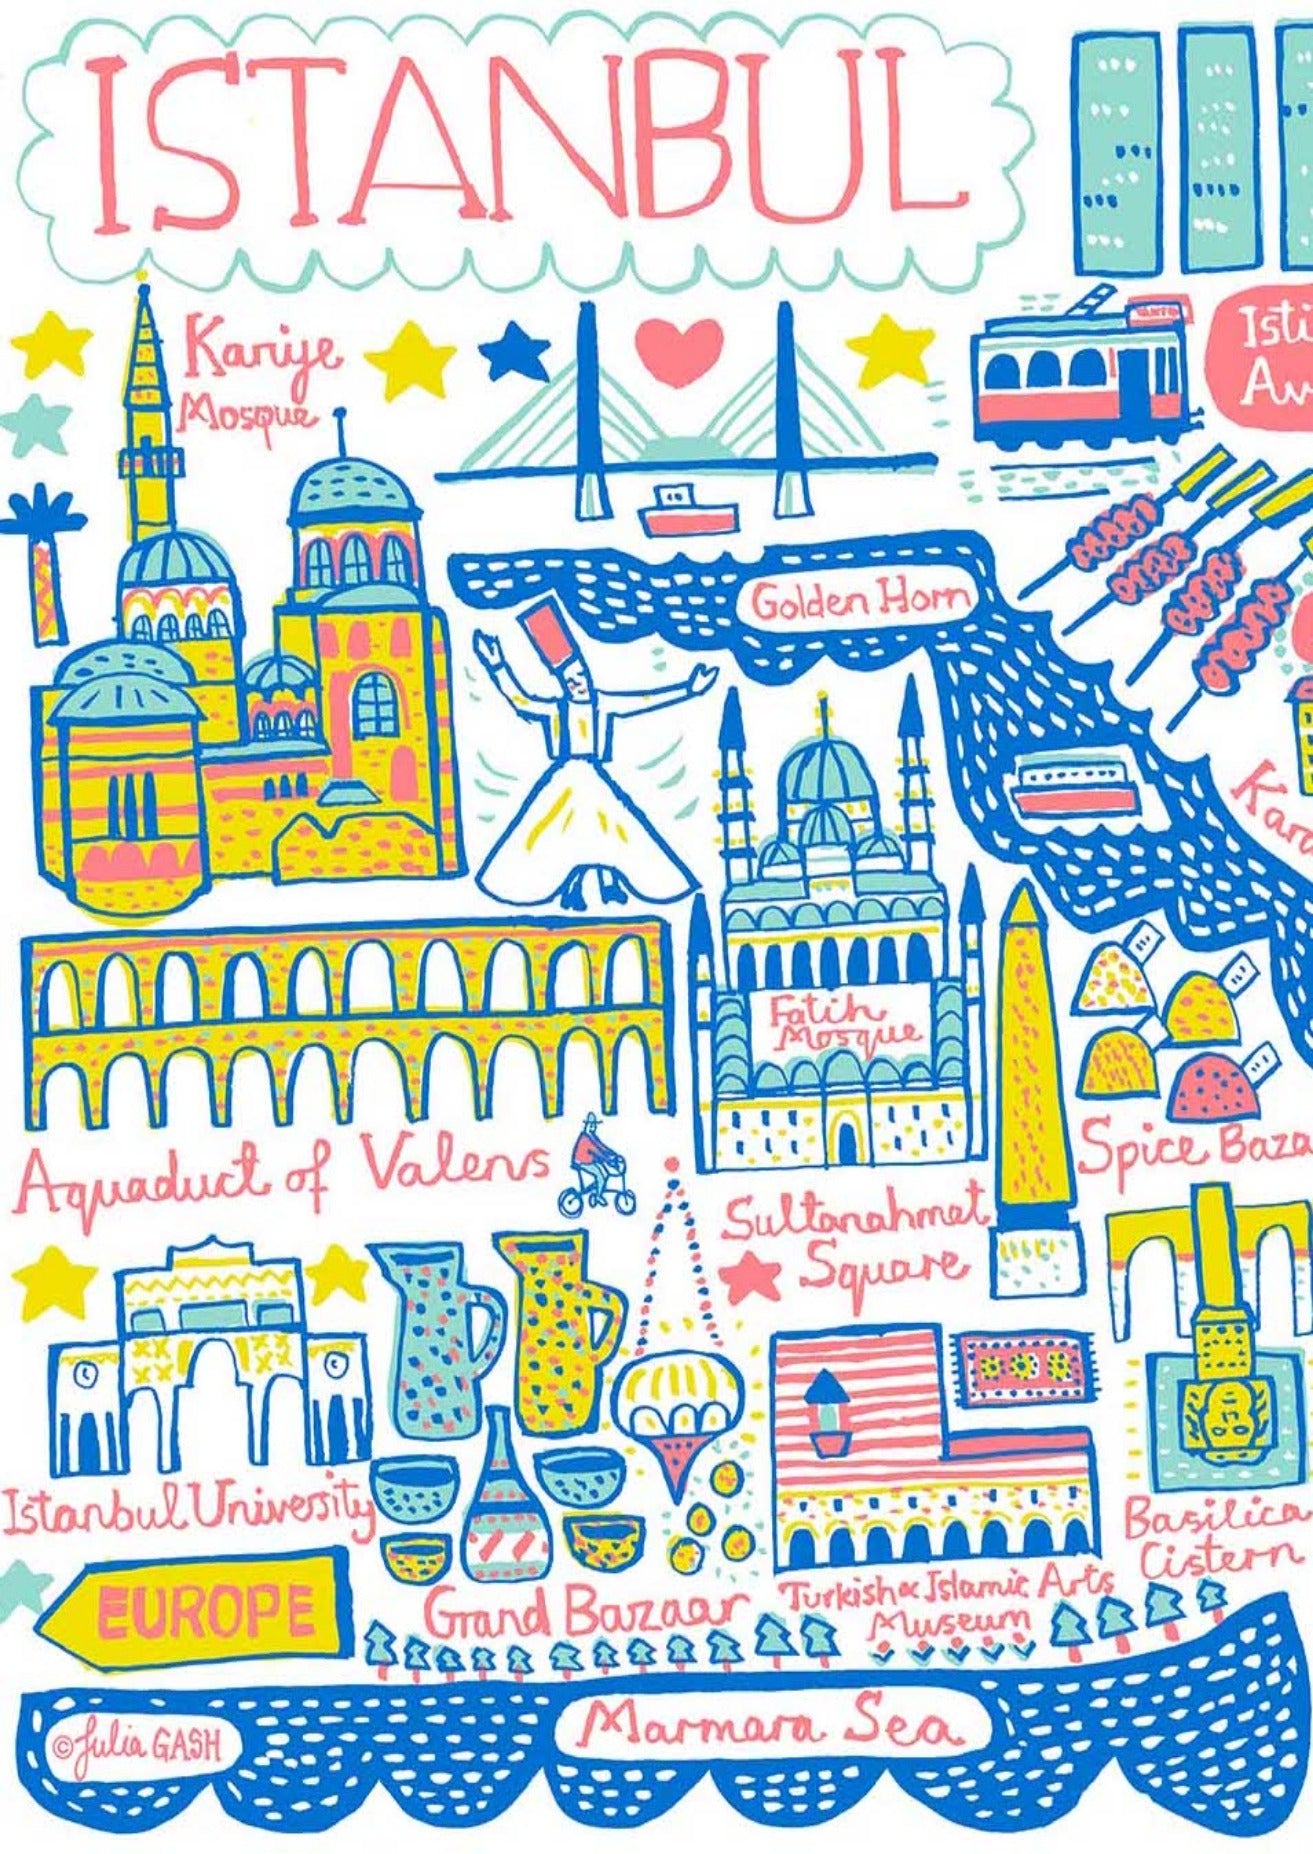 Istanbul cityscape illustration. This playful Turkish travel art print features the Blue Mosque, Hagia Sophia, Topkapi Palace and culture from Turkey by Julia Gash